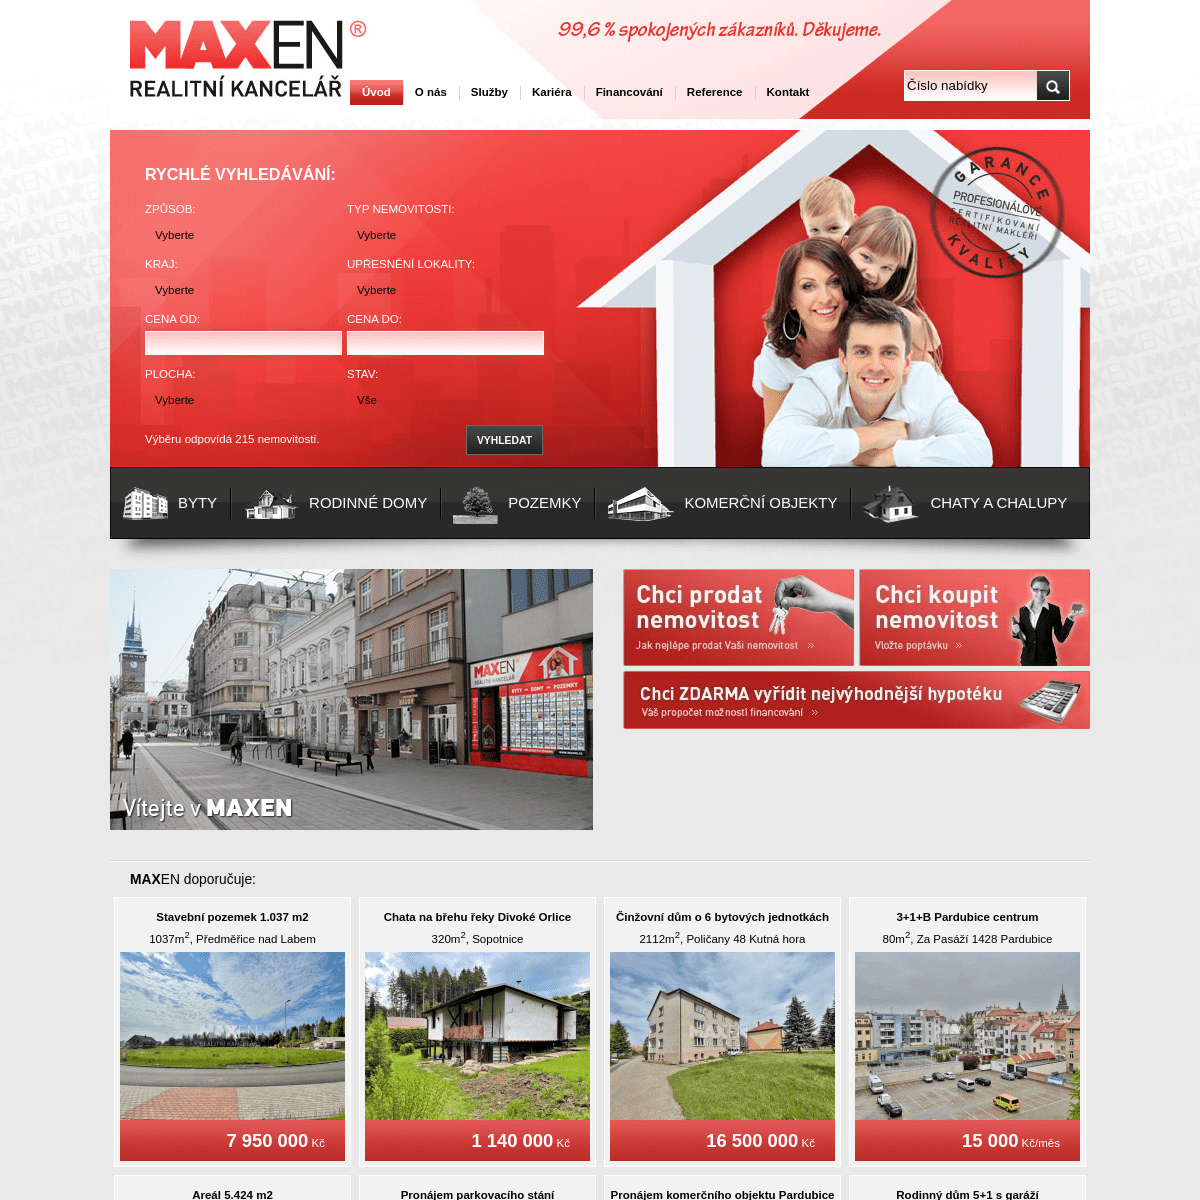 A complete backup of https://maxen.cz